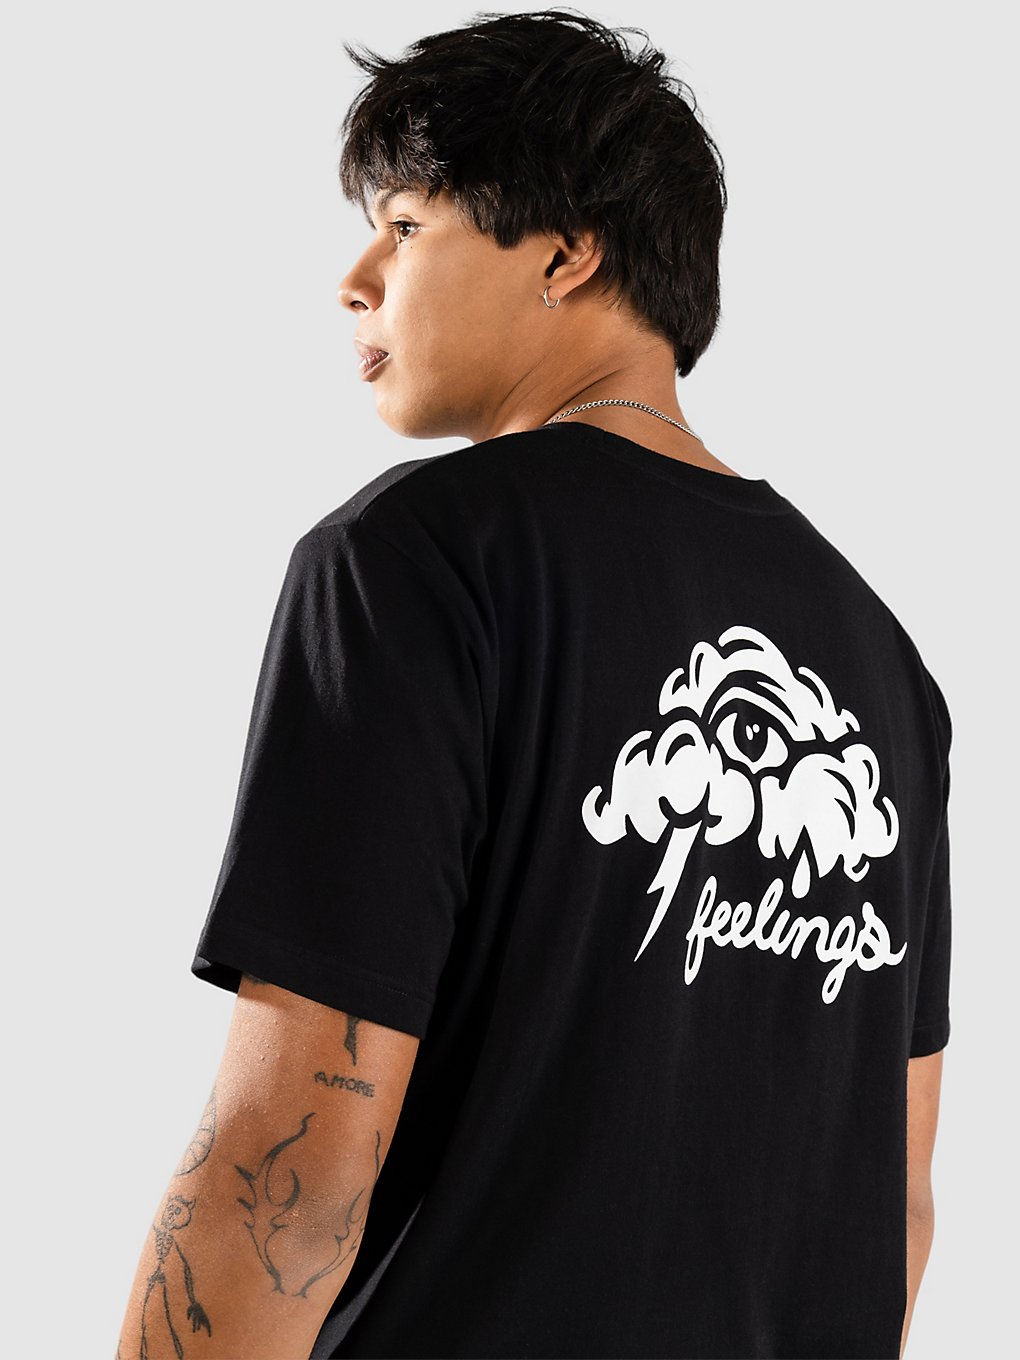 And Feelings Clouds T-Shirt black kaufen